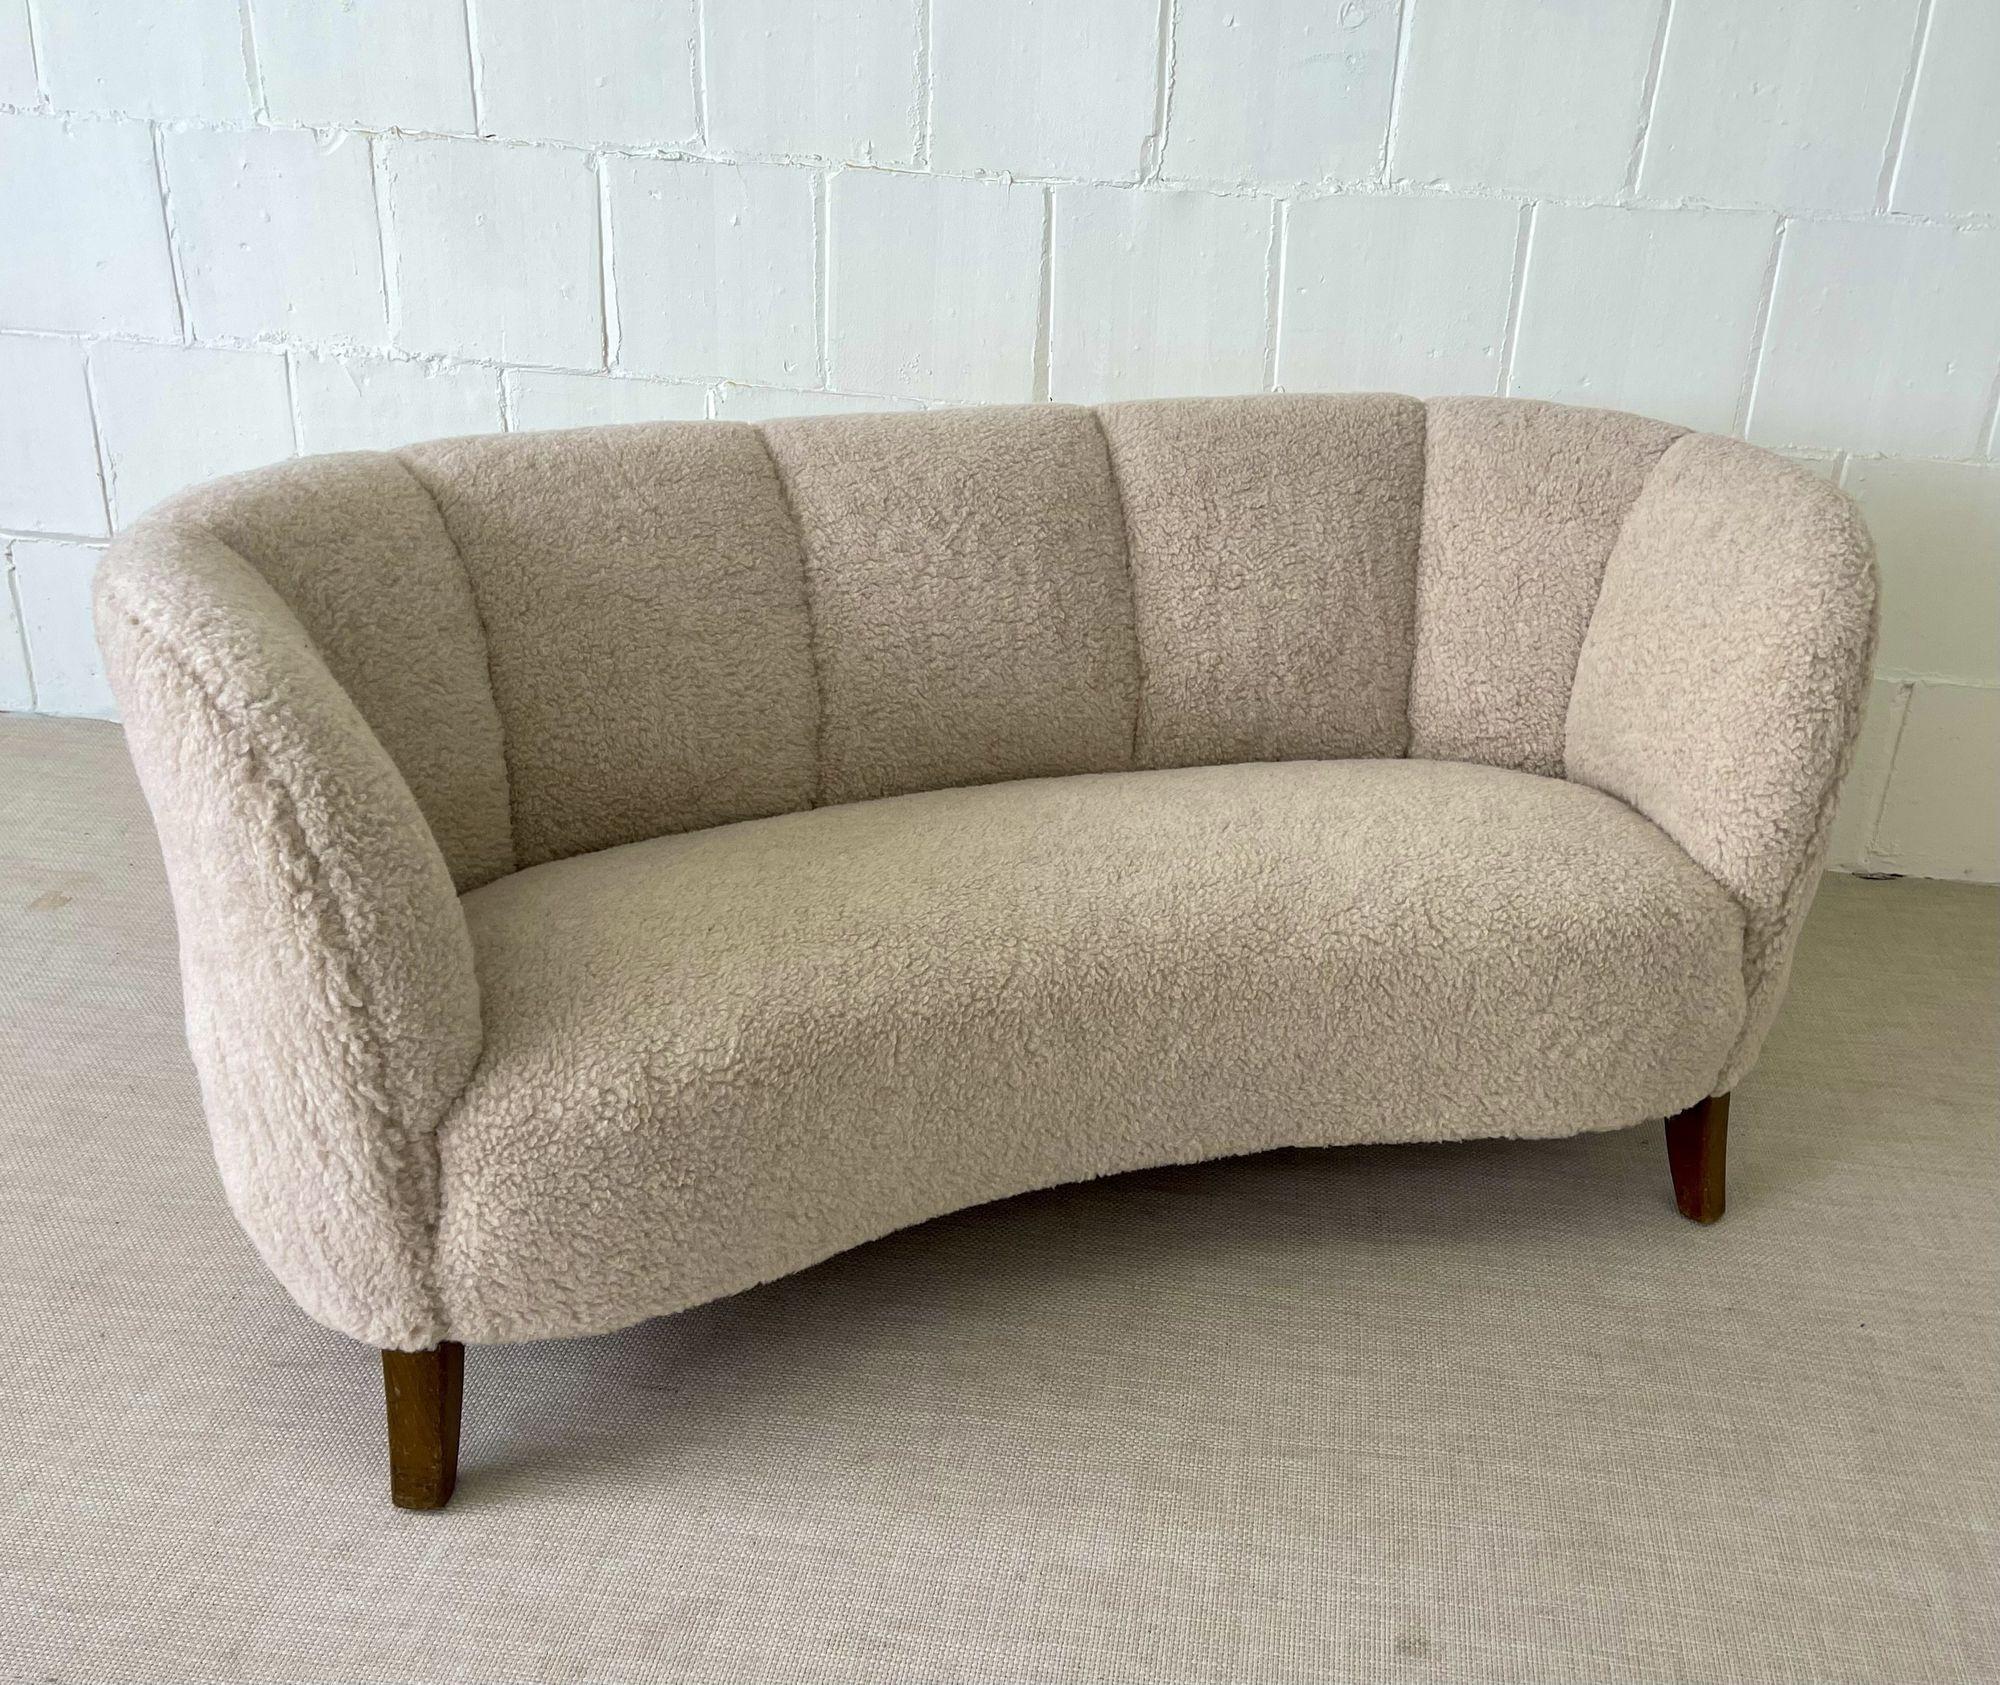 Mid-Century Modern Danish cabinet maker sofa / settee two-seater, lambswool
 
Newly upholstered in genuine lambs wool, this curved danish sofa, settee or loveseat has a beautiful freeform, organic shape. Oak legs and original undercarriage - this